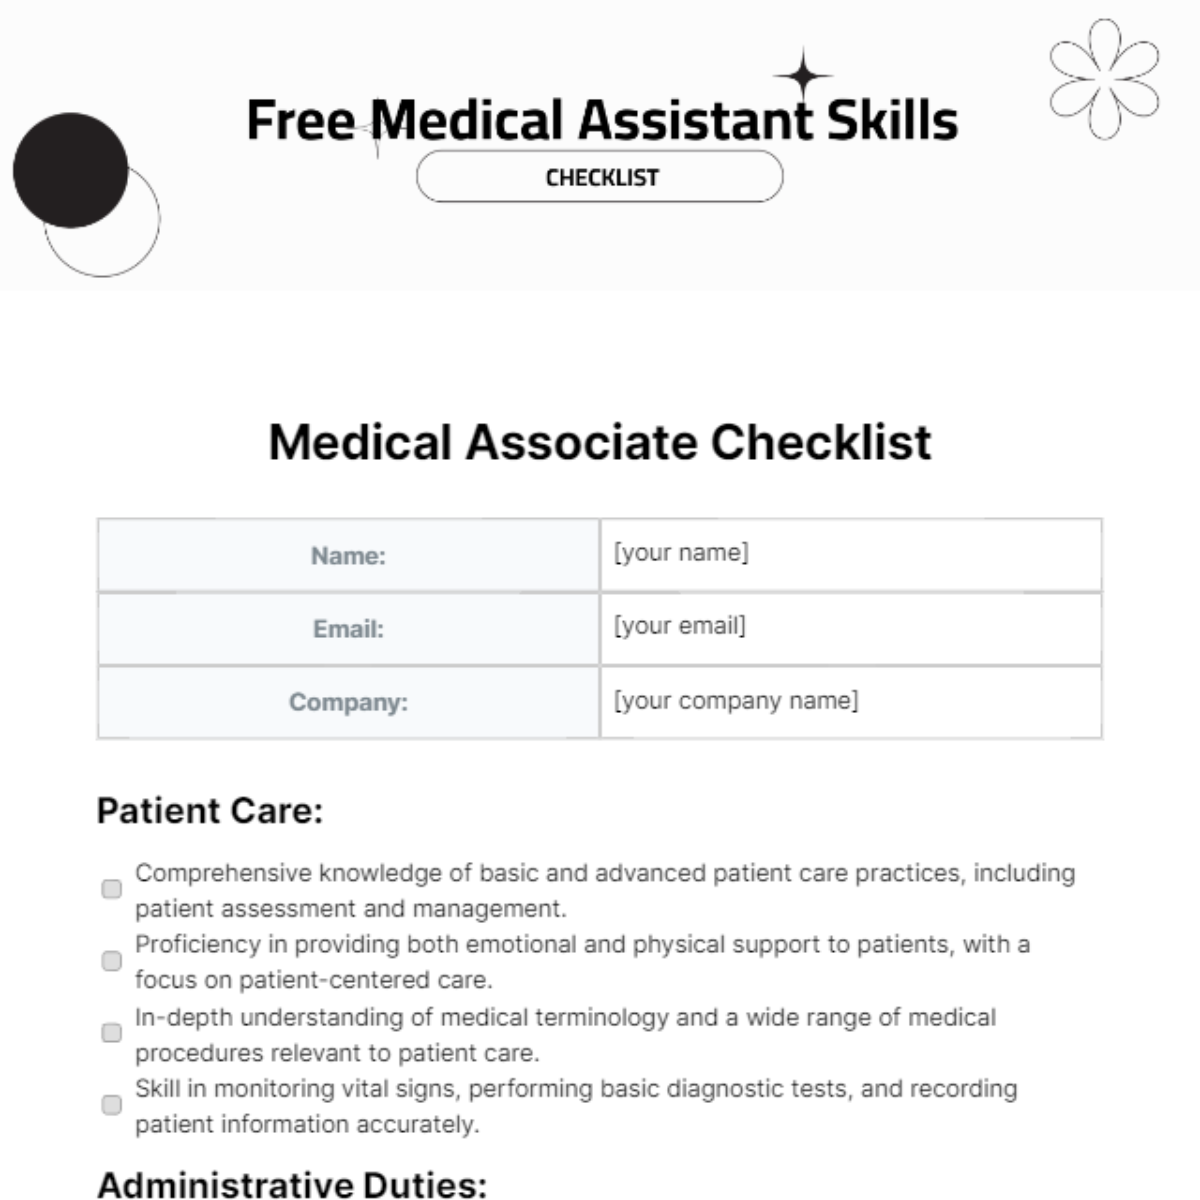 Free Medical Assistant Skills Checklist Template